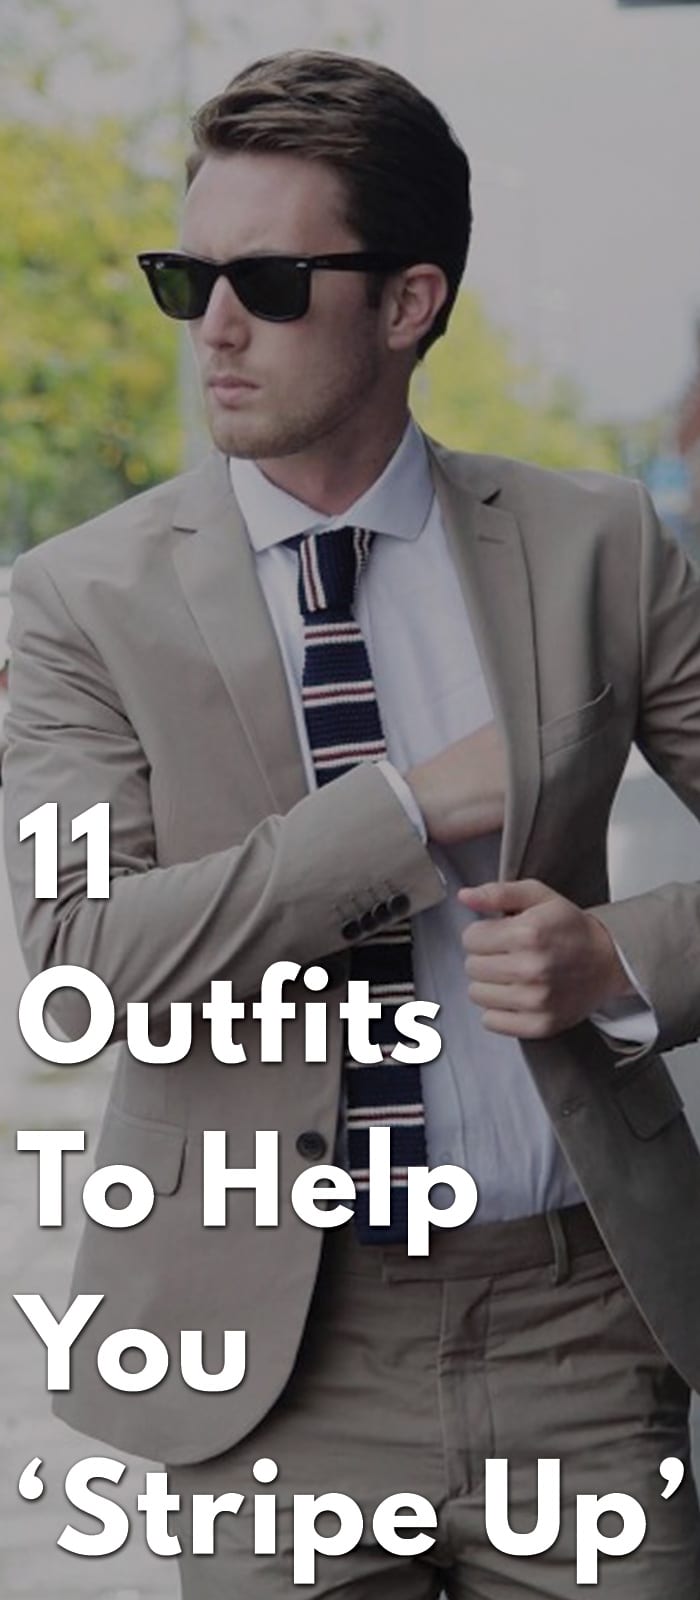 11-Outfits-to-Help-You-‘Stripe-Up’